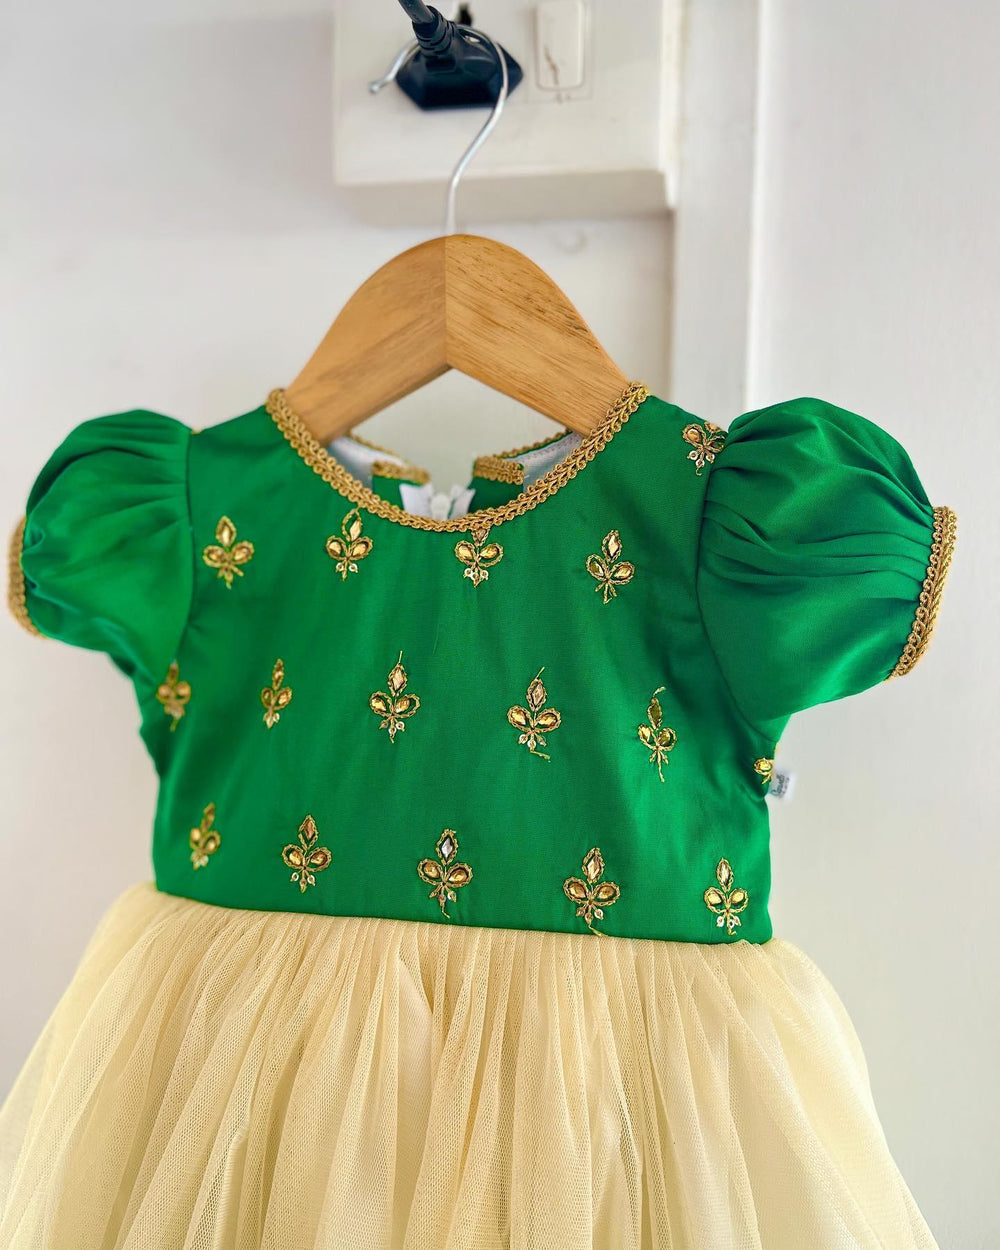 Cream & Green Traditional Embroidery Stone work Frock
Material: Green Taffetta silk top with golden embroidery stone work, Cream soft net skirt with matching border. Beautifully designed outfit for baby girls with smoo